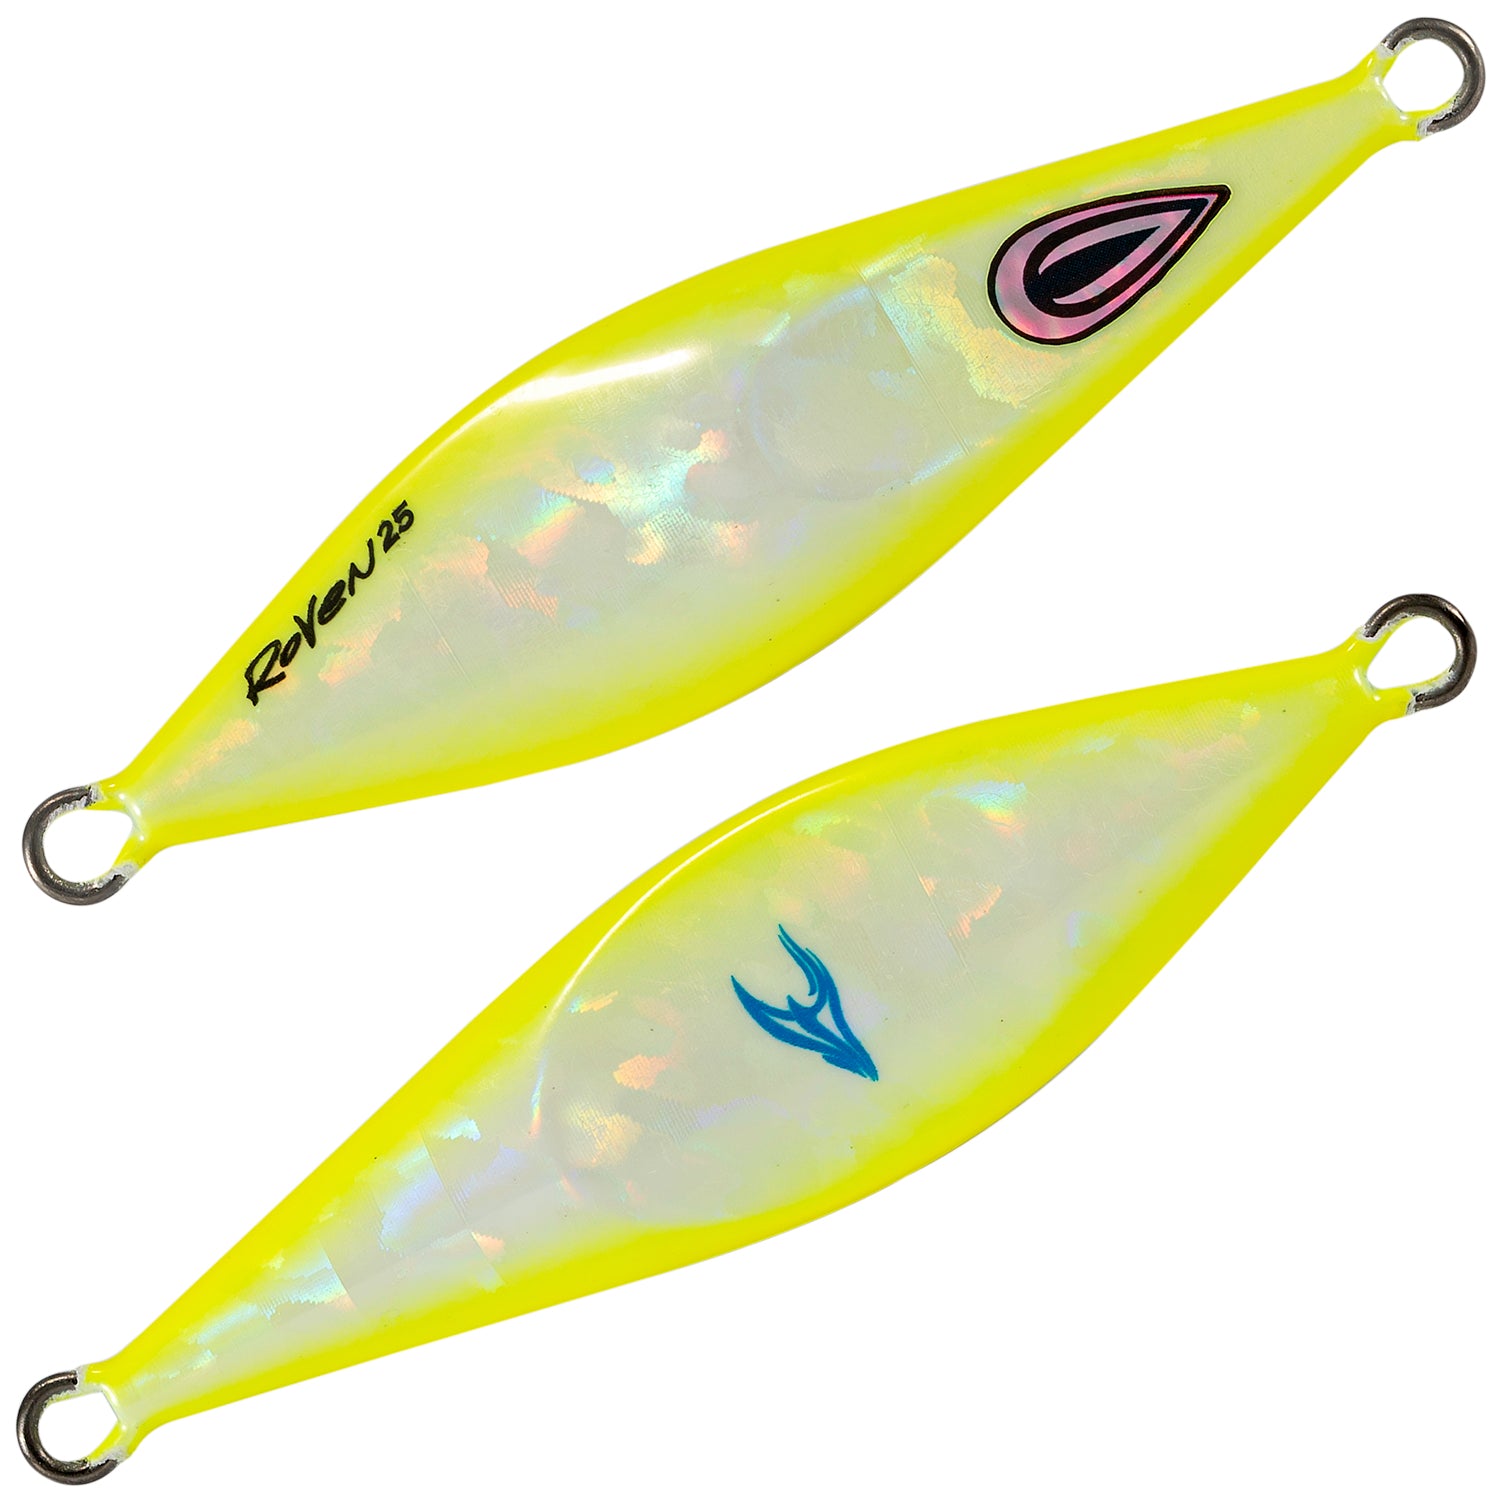 Oceans Legacy Roven Jig Rigged 25g 7